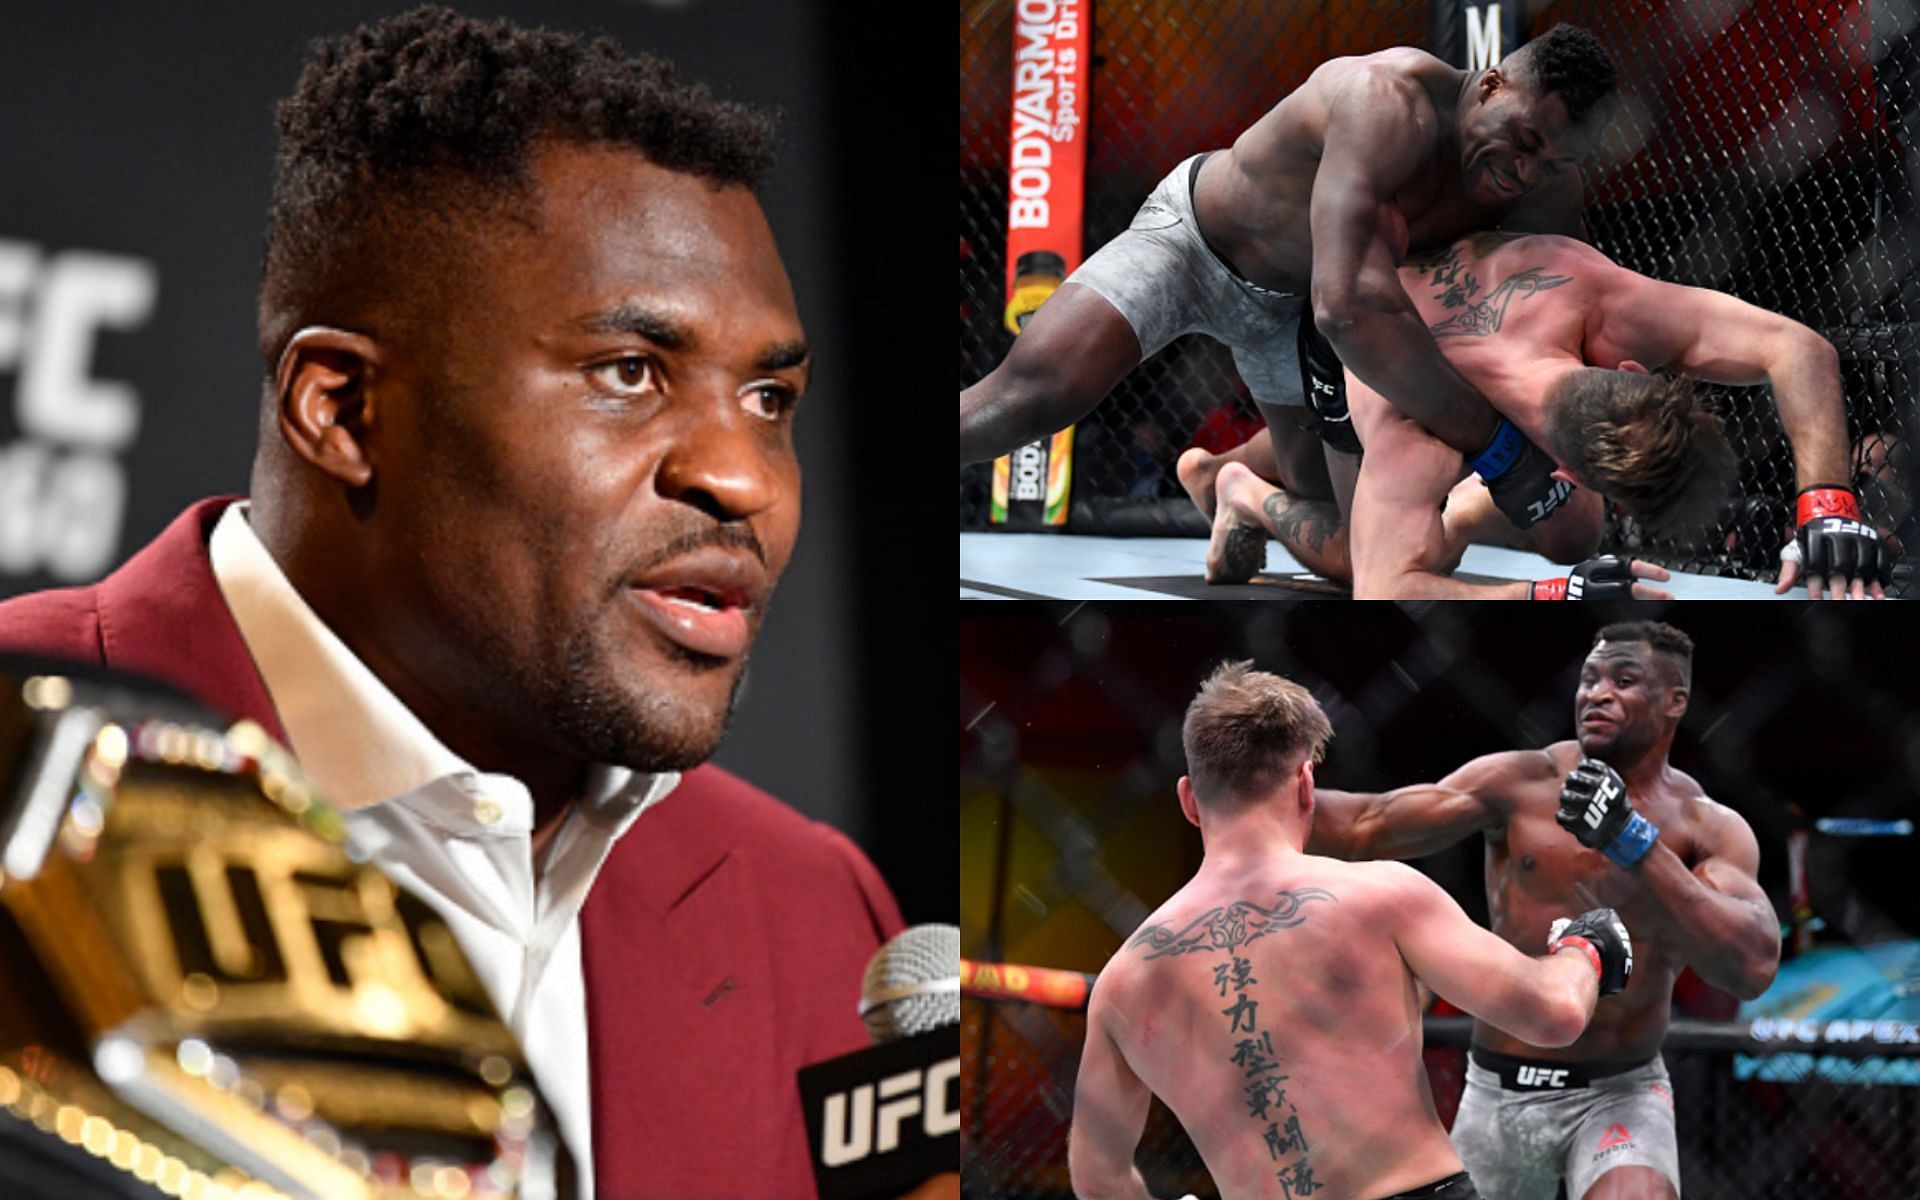 Francis Ngannou (left); Ngannou vs. Miocic at UFC 260 (top and bottom right)